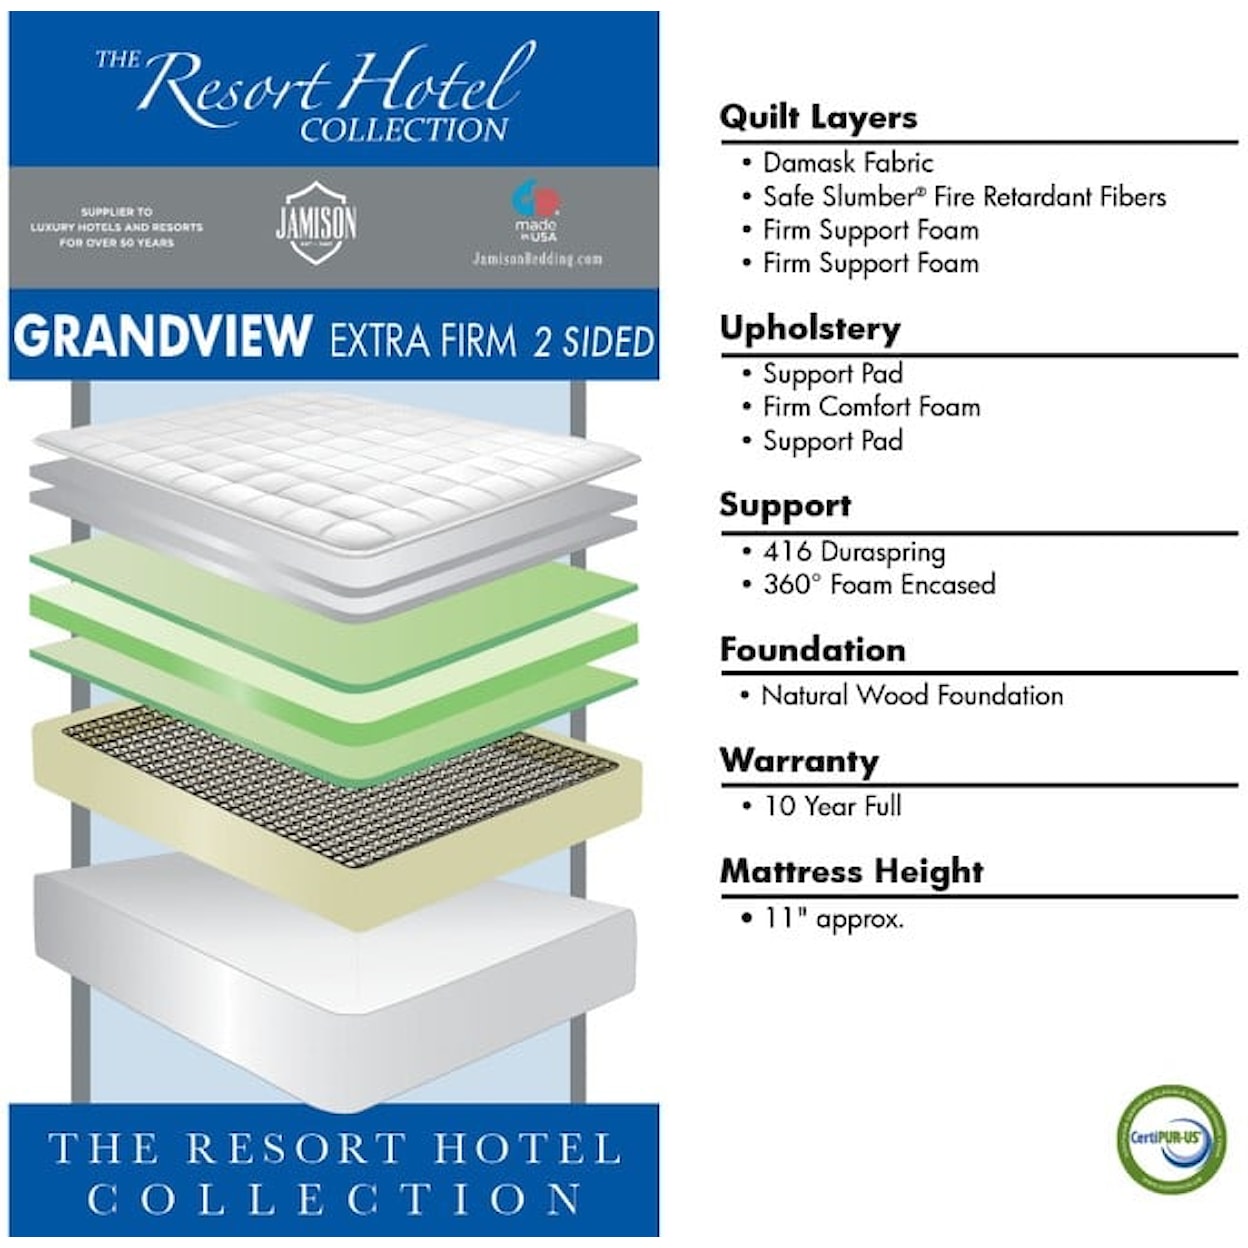 Jamison Bedding Resort Hotel Grandview Extra Firm GRANDVIEW 2/ SIDED EXTRA FIRM FULL | MATTRES